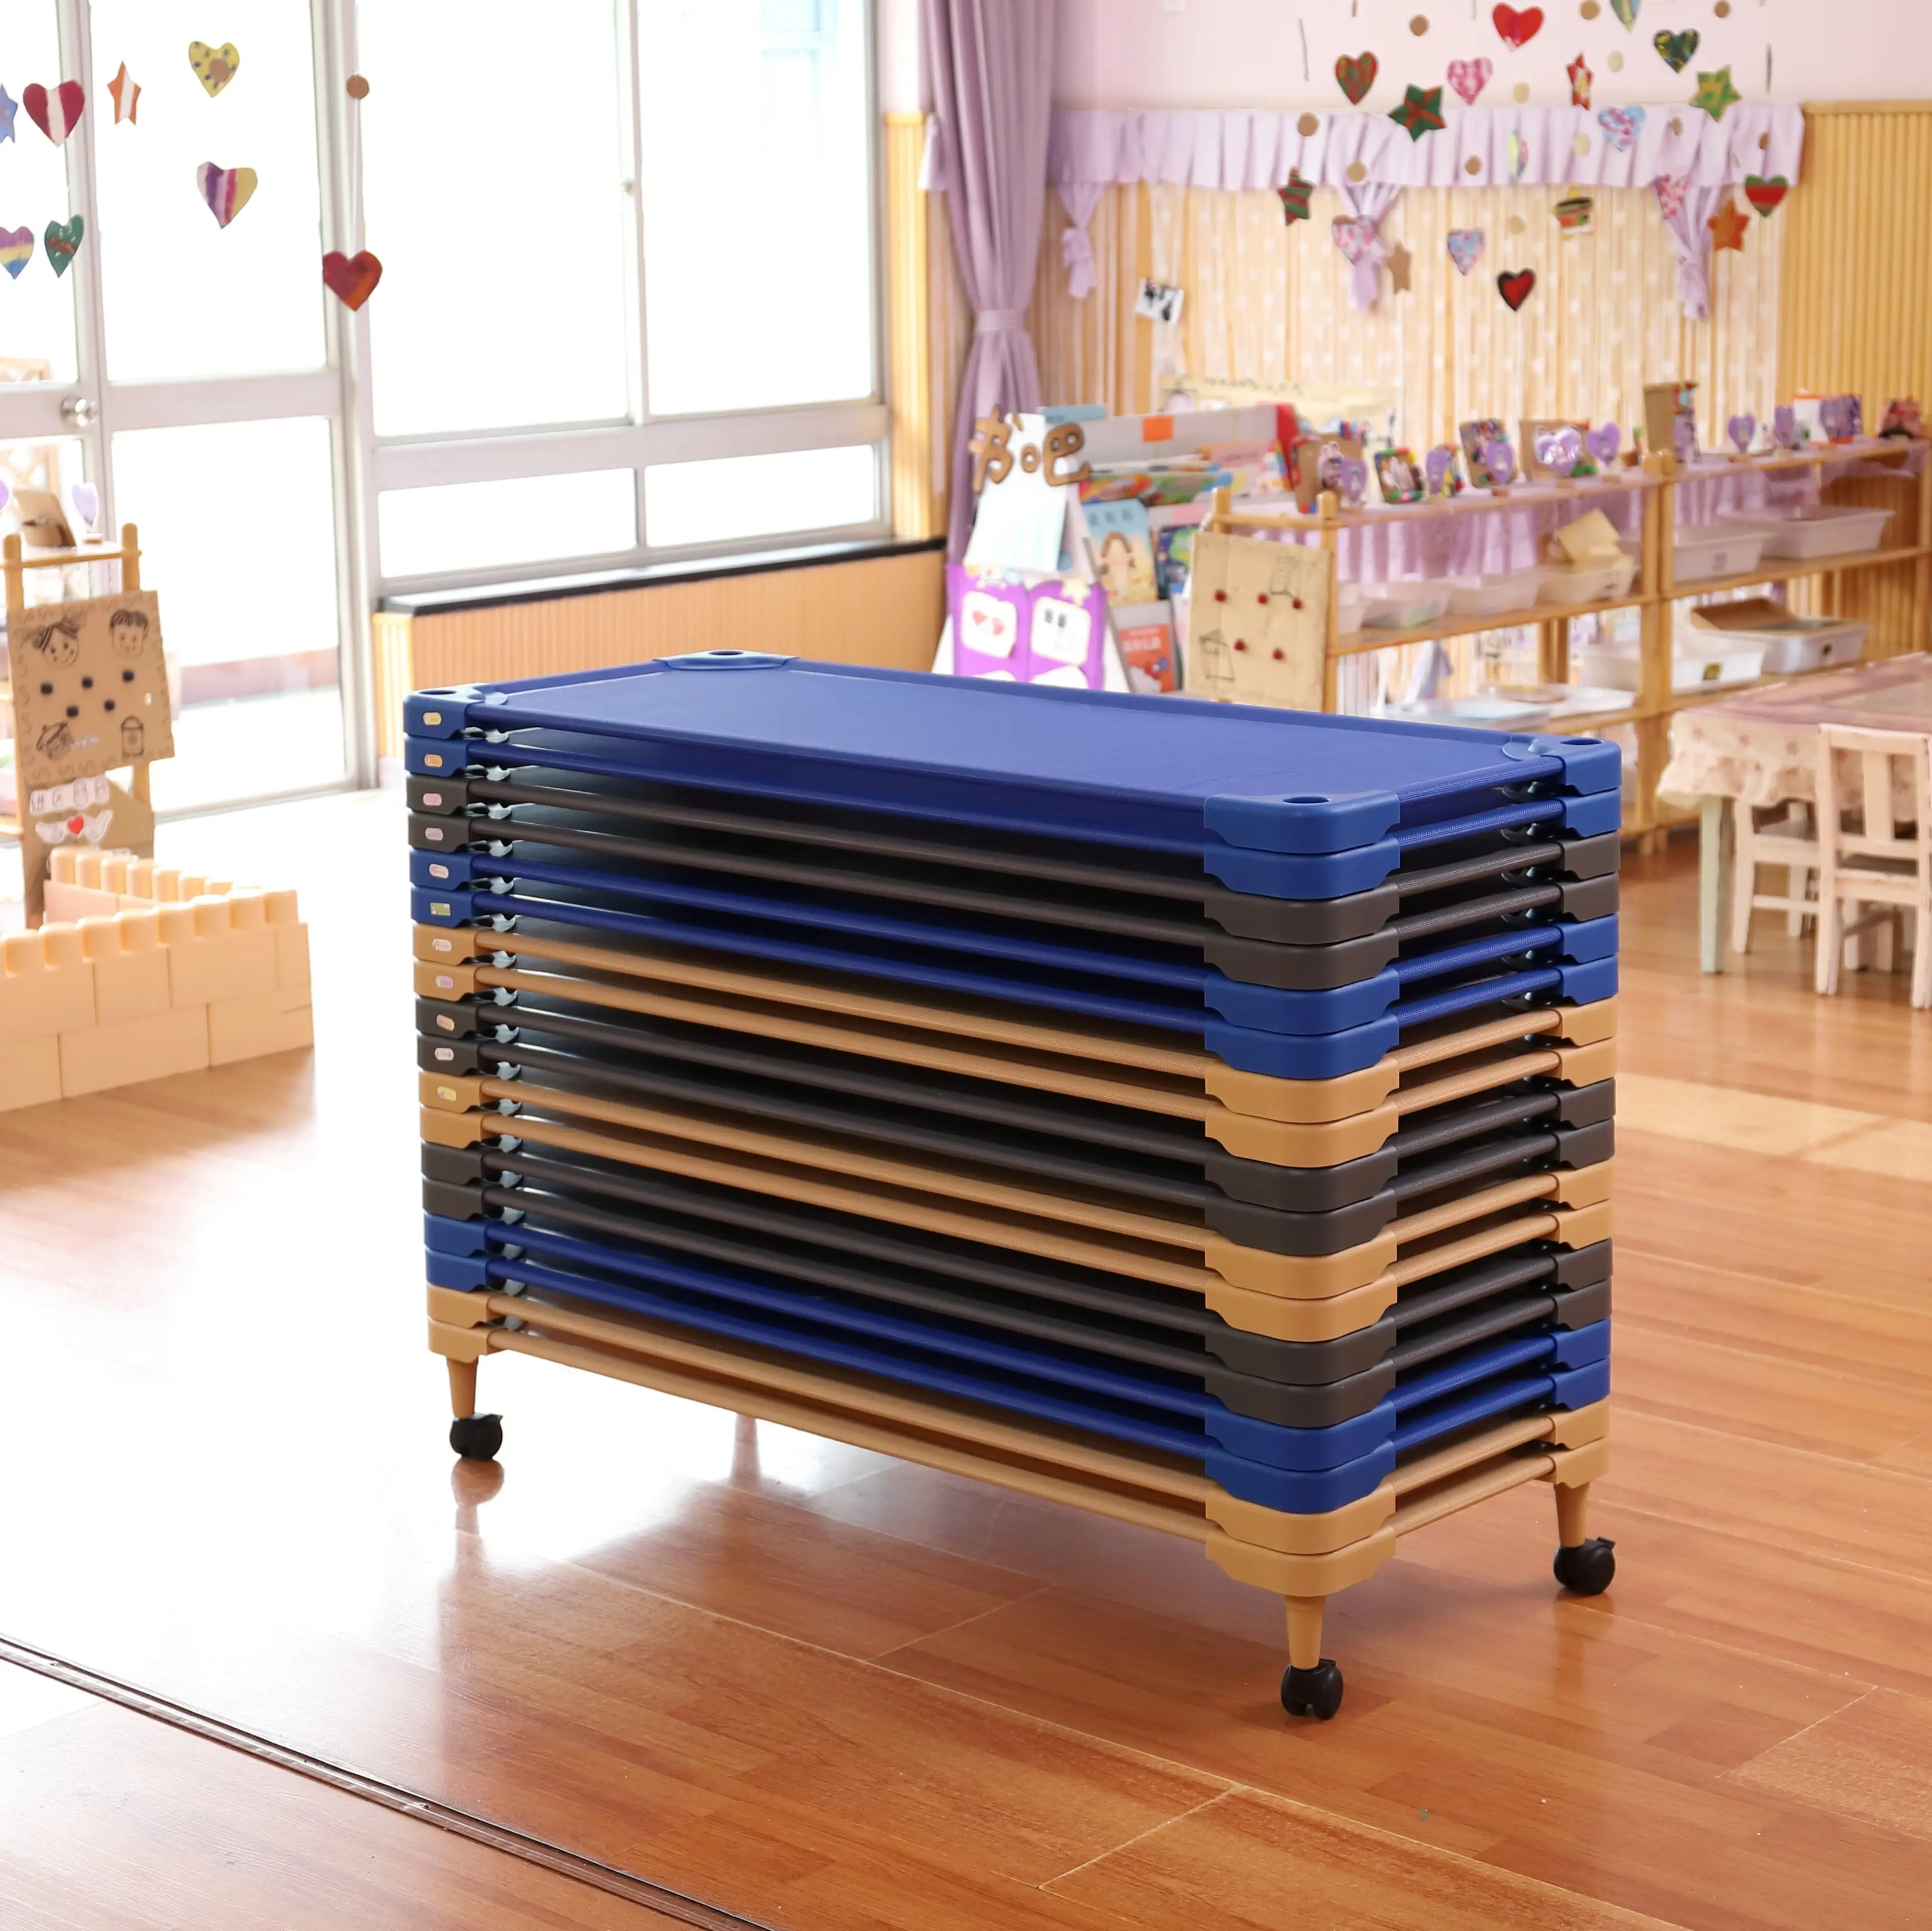 High quality Easy to carry molded plastic bed daycare furniture